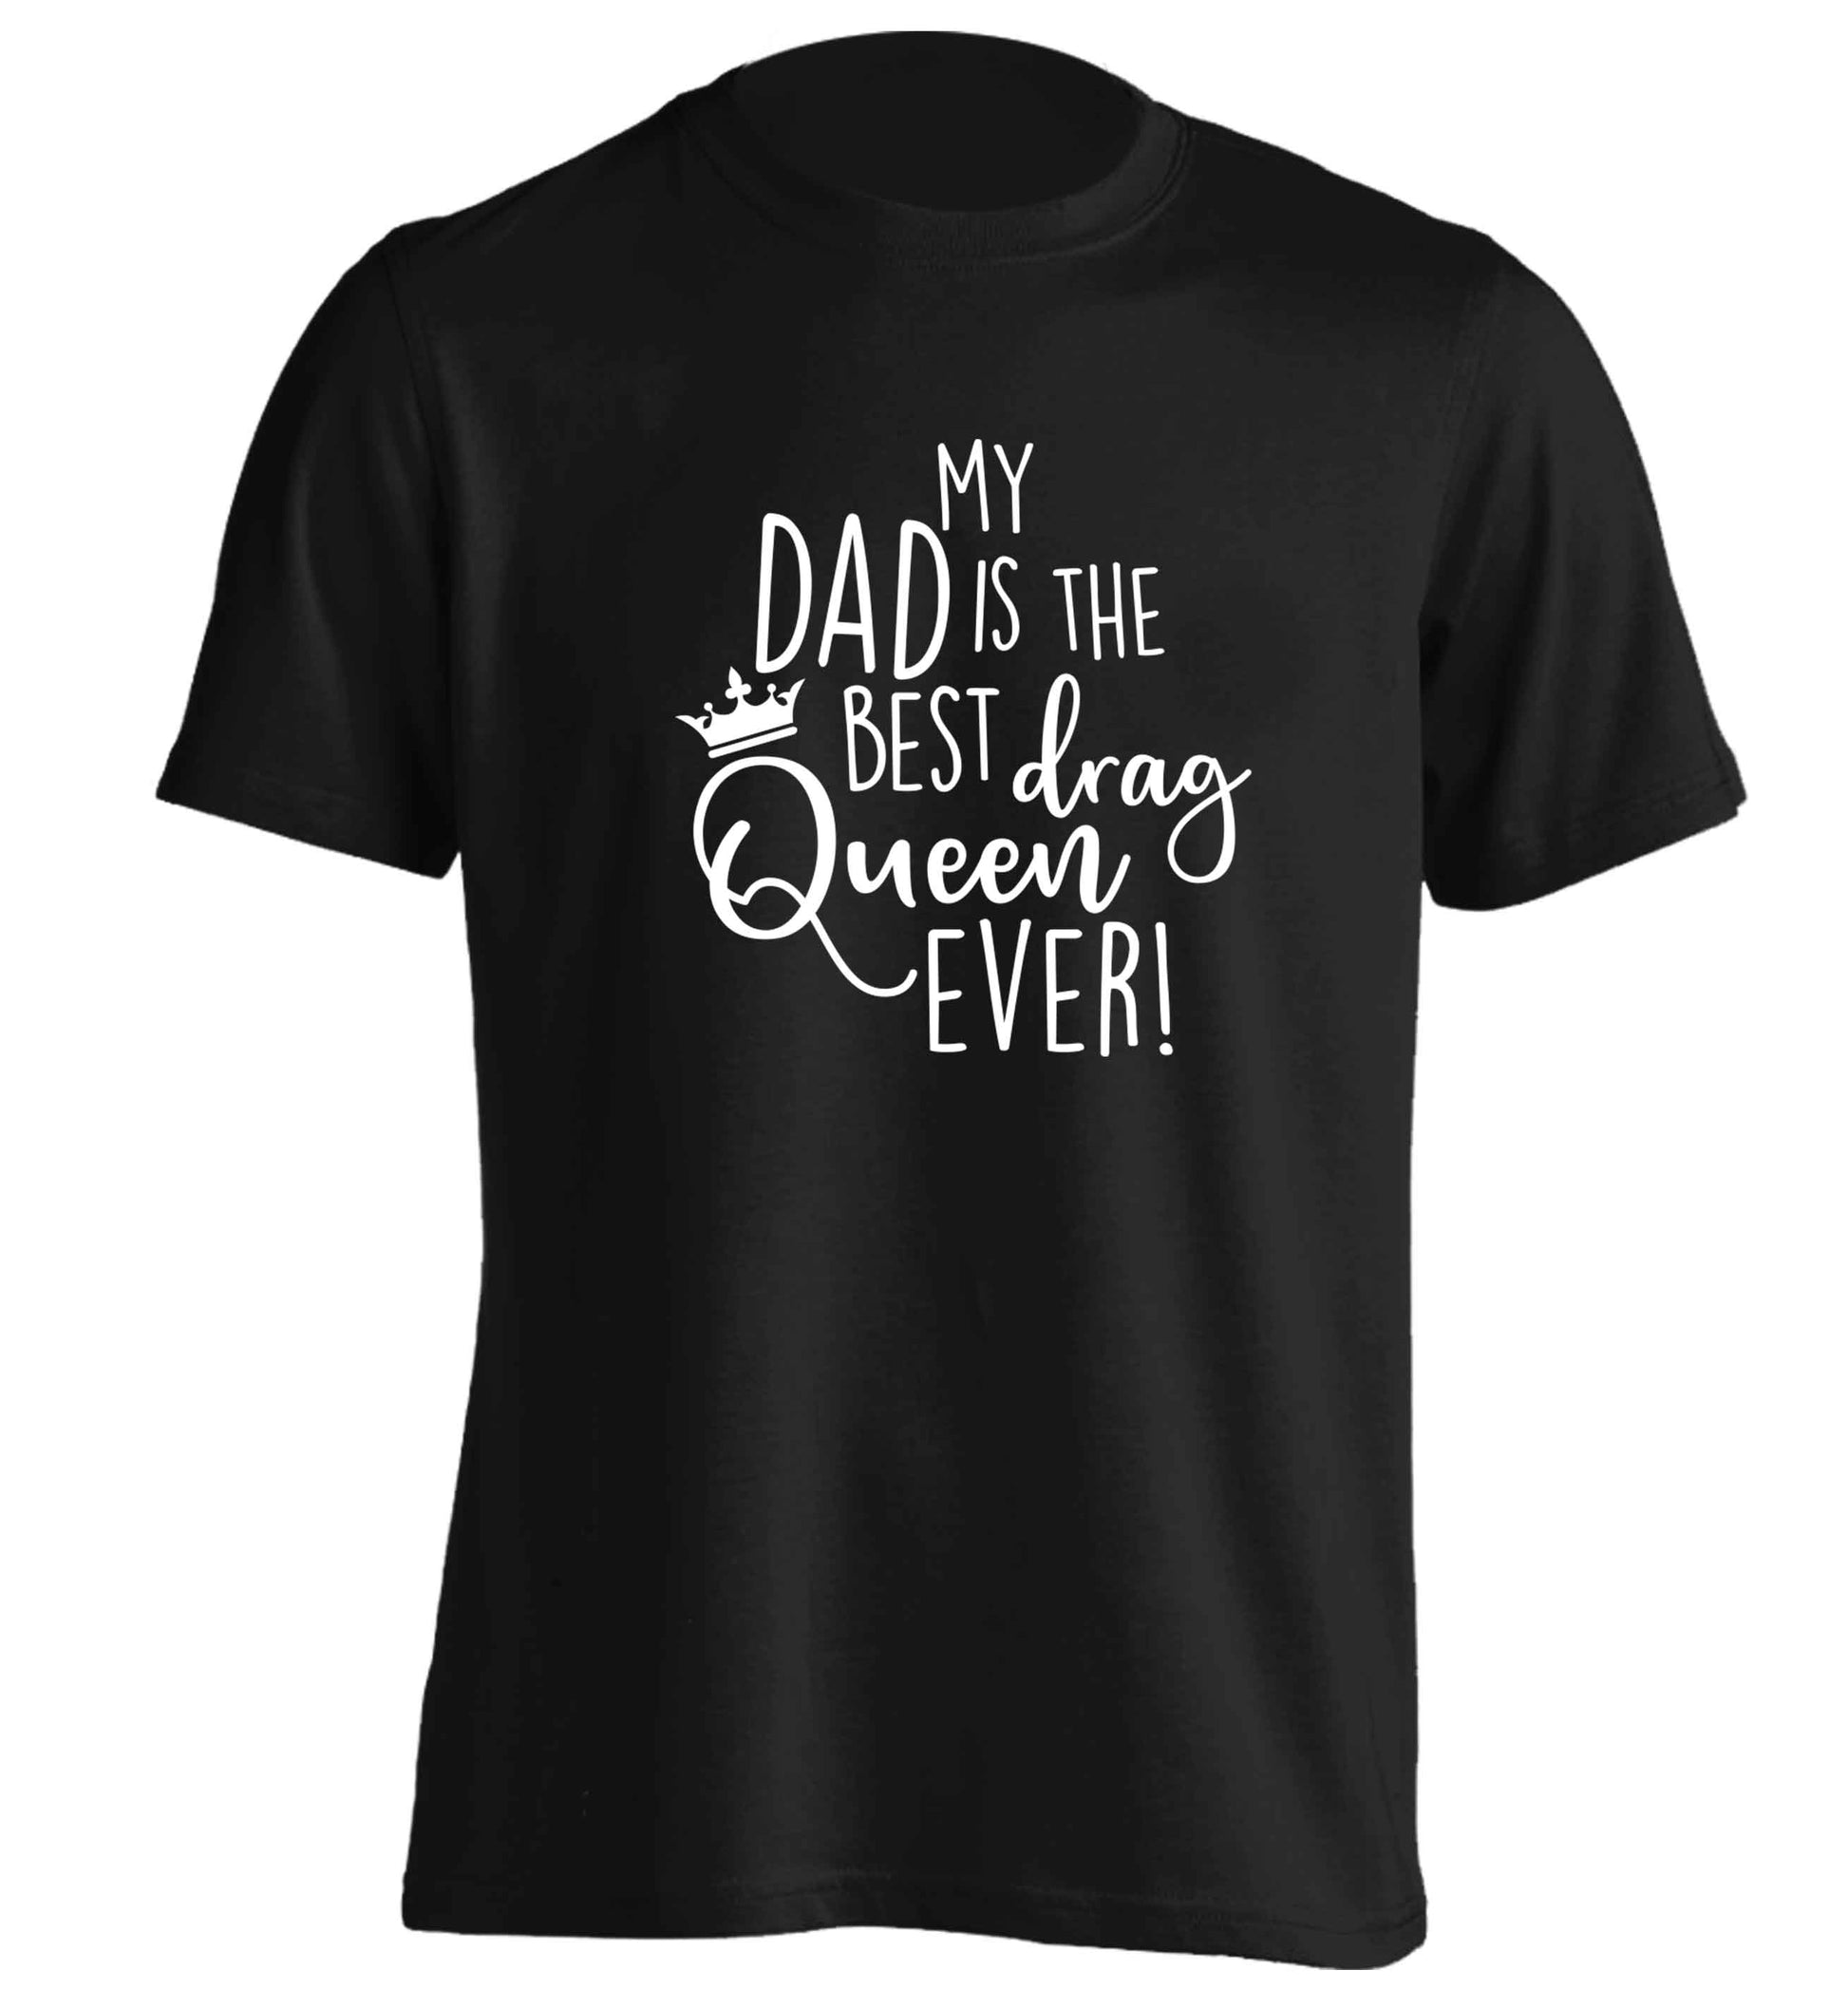 My dad is the best drag Queen ever adults unisex black Tshirt 2XL